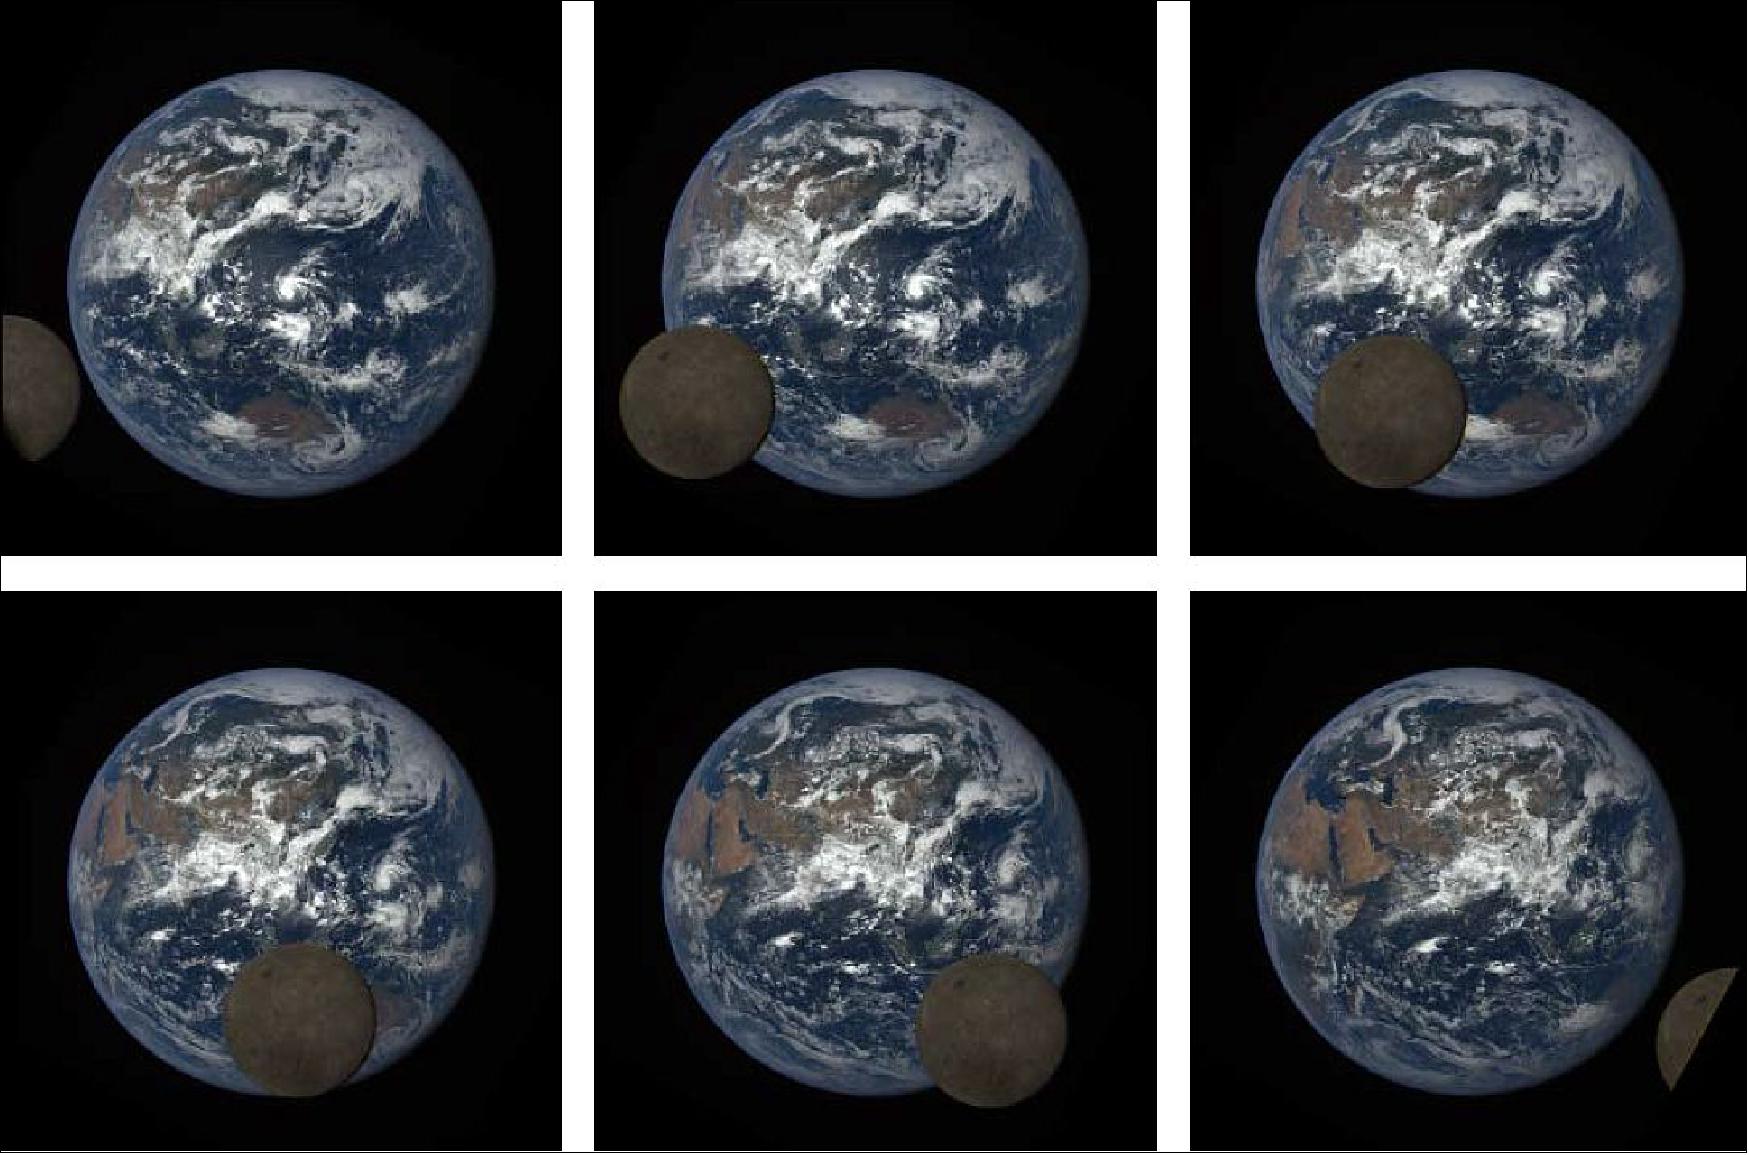 Figure 32: On July 5, 2016, the moon passed between the DSCOVR spacecraft ) and Earth. Over a period of about four hours, the EPIC (Earth Polychromatic Imaging Camera) instrument snapped a series of images of the far side of the moon, which is never seen by observers on Earth’s surface, passing by. Meanwhile, in the backdrop, Earth rotates. The background changes throughout the series, first showing Australia and the Pacific and gradually revealing Asia and Africa (image credit: NASA)